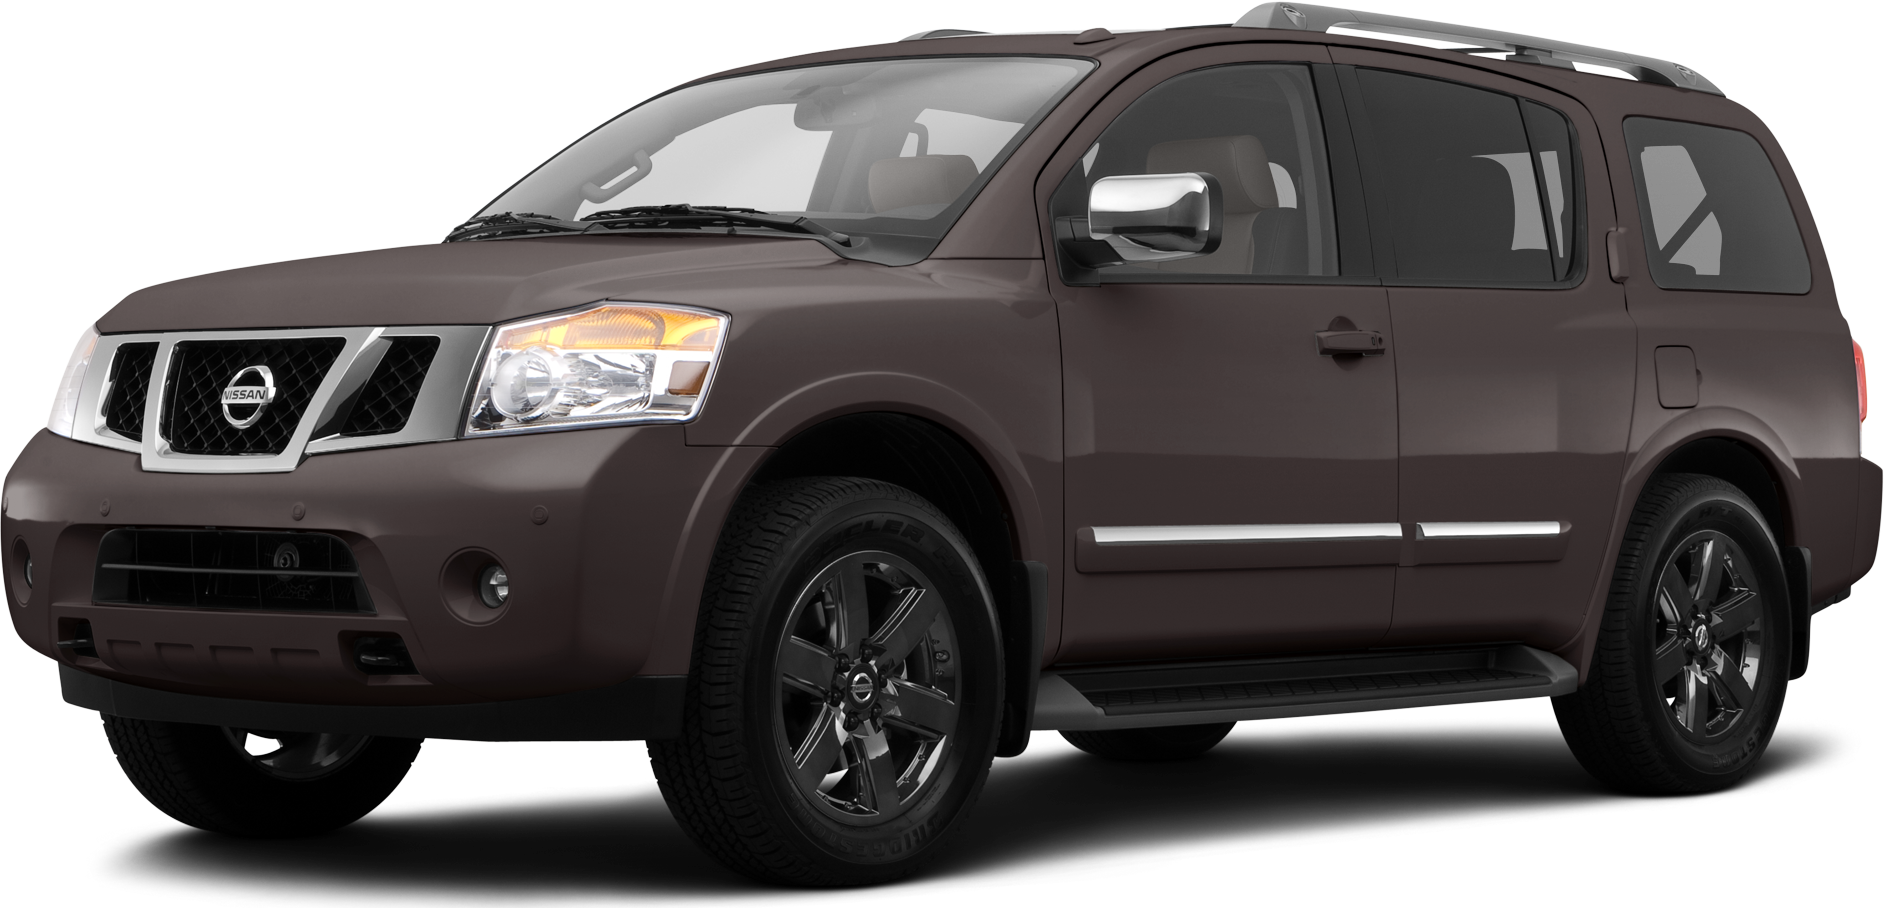 2014 Nissan Armada Price Value Ratings And Reviews Kelley Blue Book